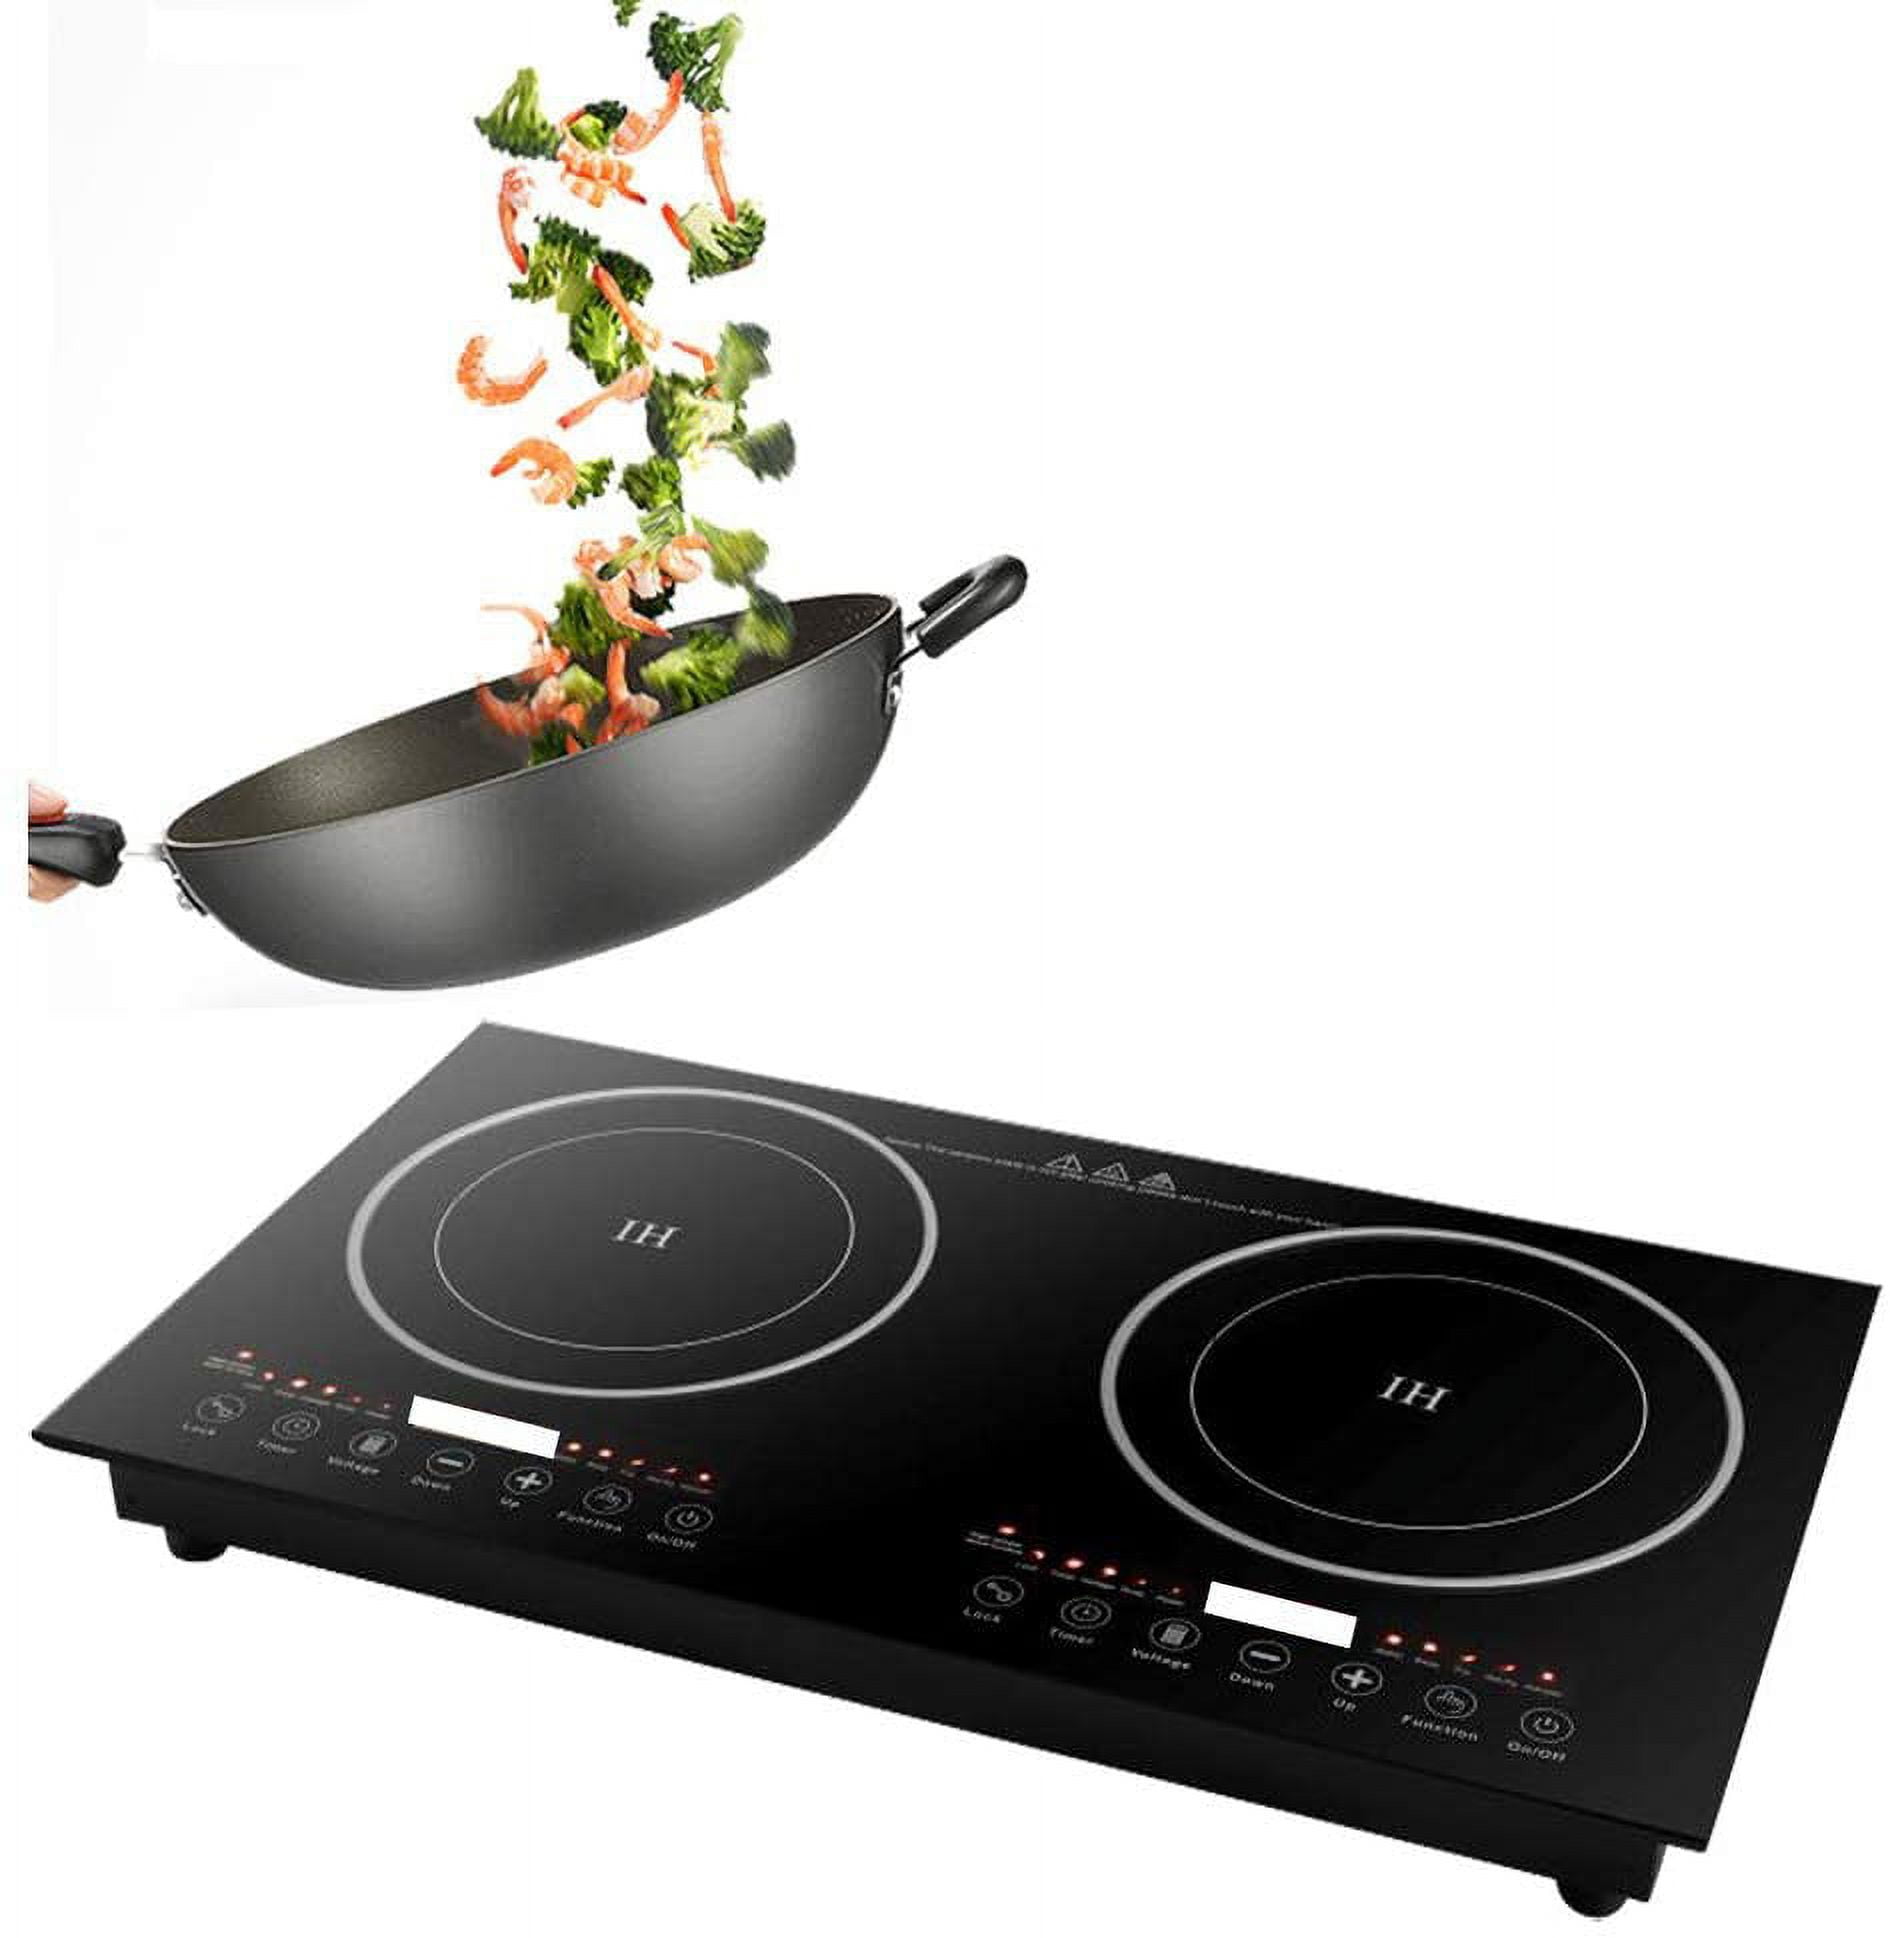 Portable cooktop offers twice the convenience - CNET